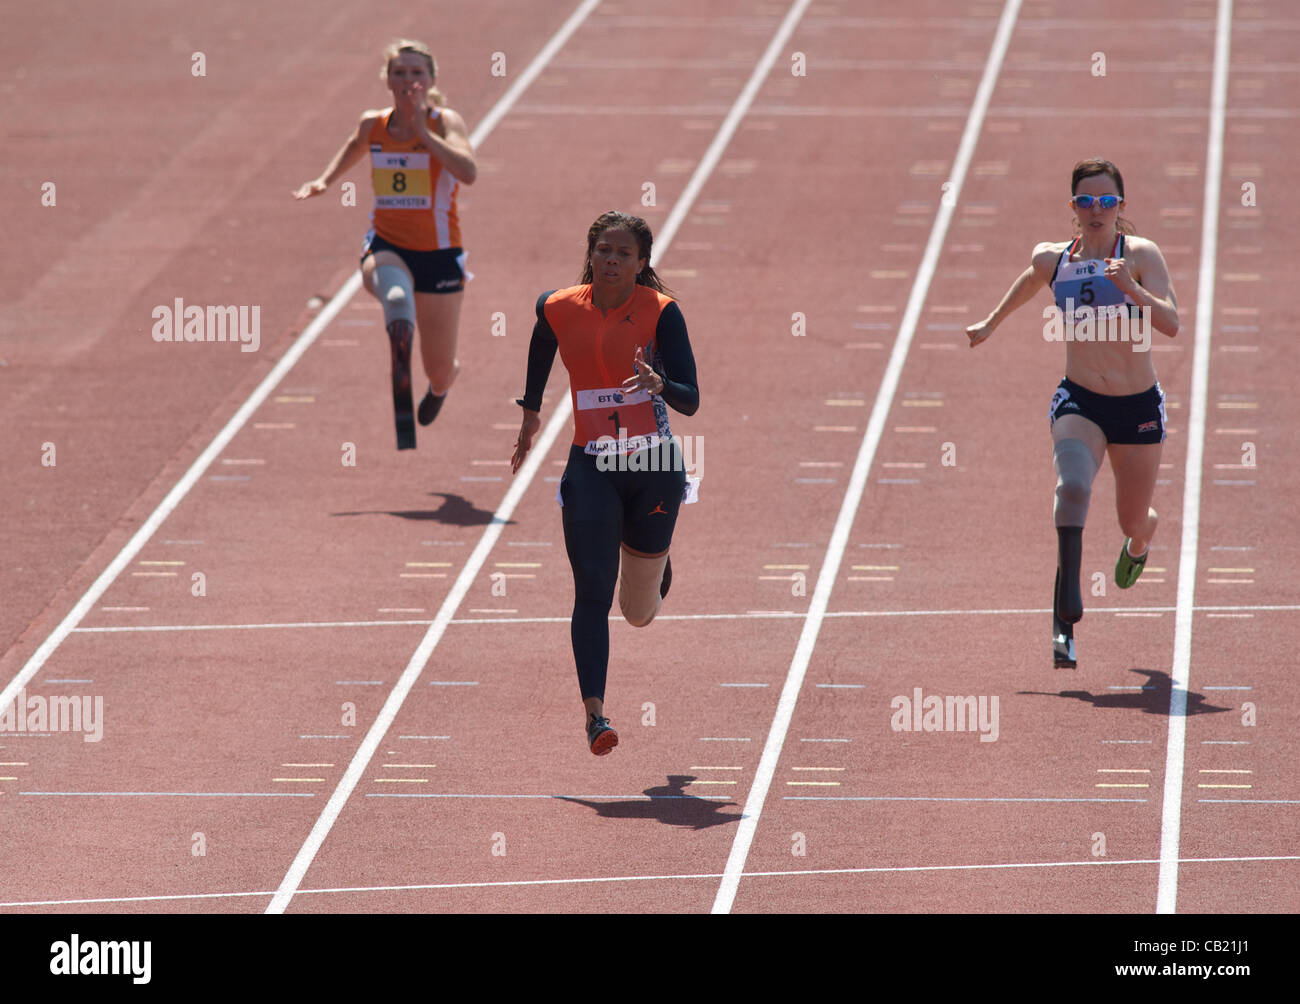 April Holmes (USA) (1) wins the 100m T42 T43  T44 Category in 13.46. Marlou van Rhyn (Netherlands) (5) 2nd in 13.58.Stephanie Reid (GB)(6) 3rd 14.07 in the Paralympic World Cup at Sportcity, Manchester UK  22-05-2012 Stock Photo